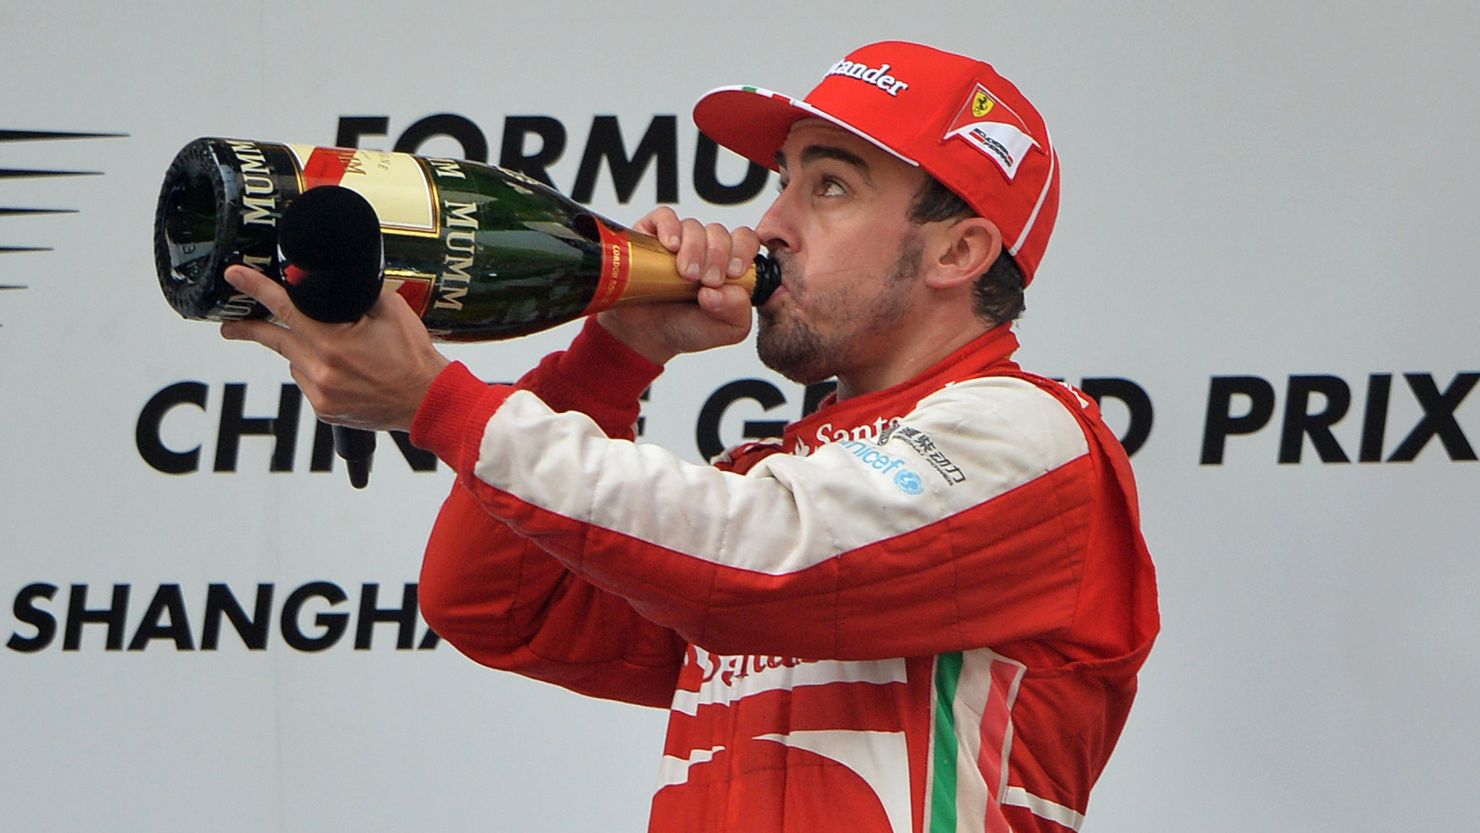 Fernando Alonso is hoping to claim a second victory of the season on Sunday.